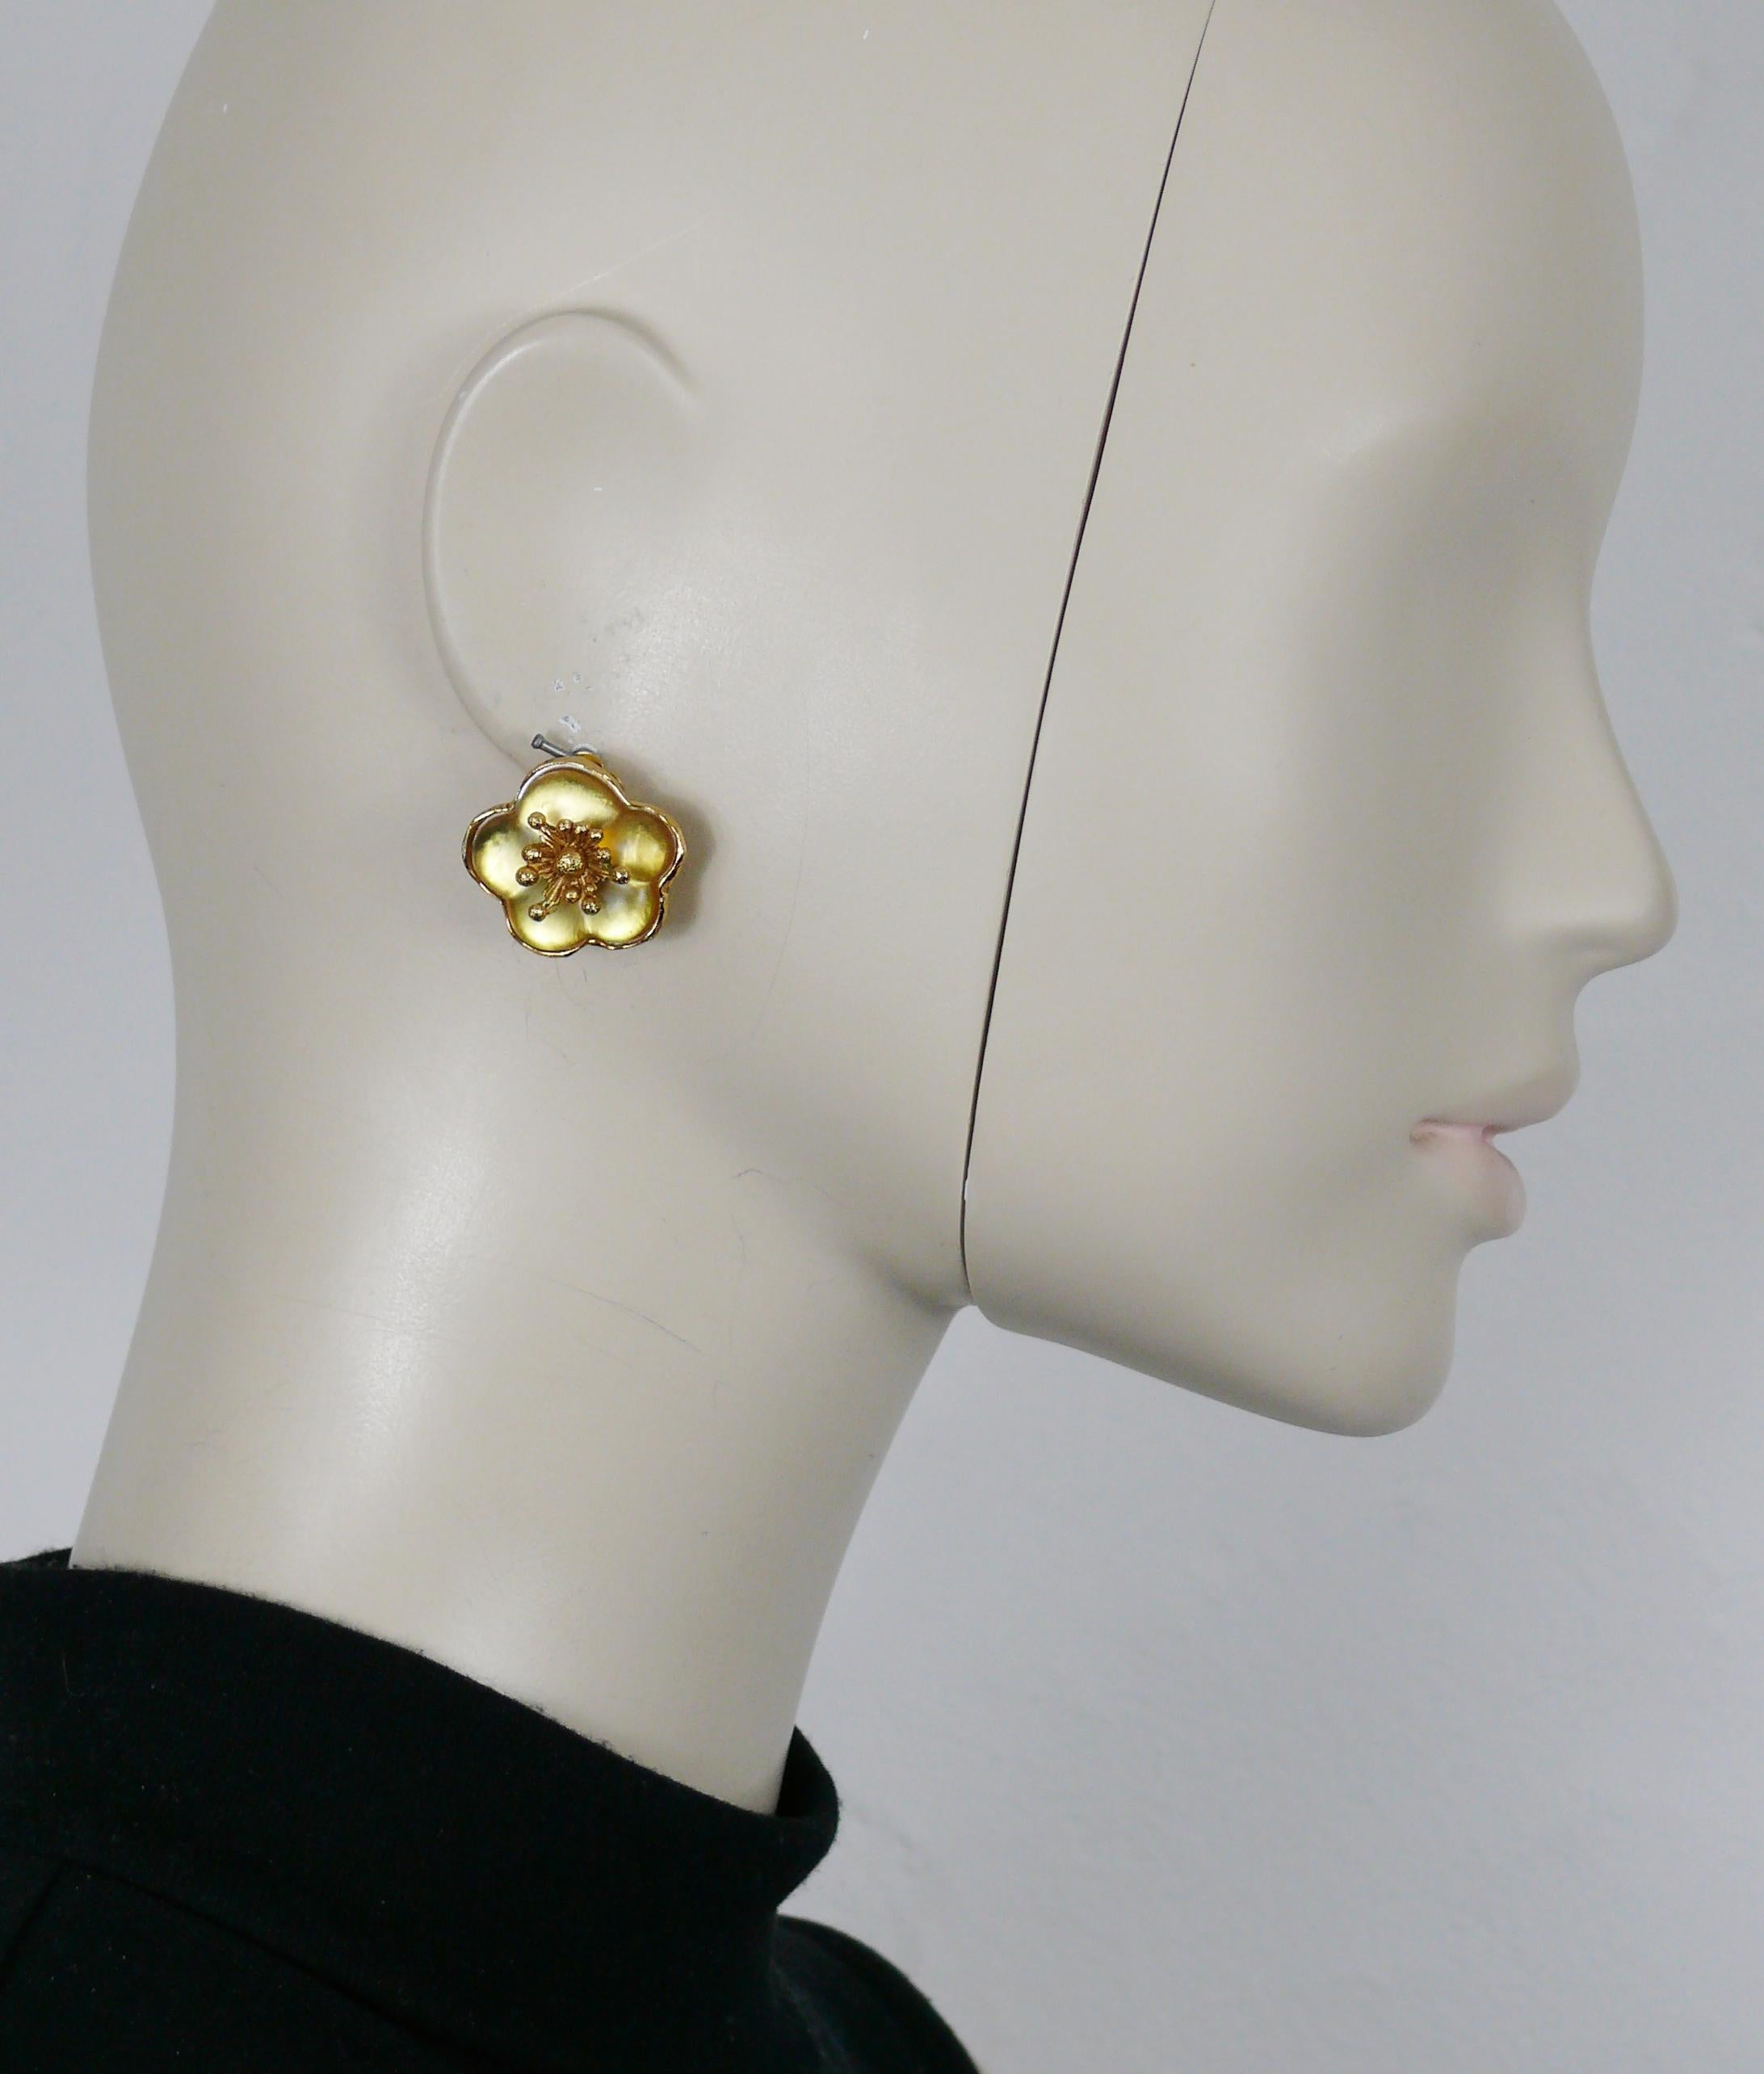 KENZO vintage gold tone clip-on earrings featuring a yellow resin flower.

Embossed KENZO Paris Made in France.

Indicative measurements : max. height approx. 2.2 cm (0.87 inch) / max. width approx. 2.4 cm (0.94 inch).

Weight per earring : approx.